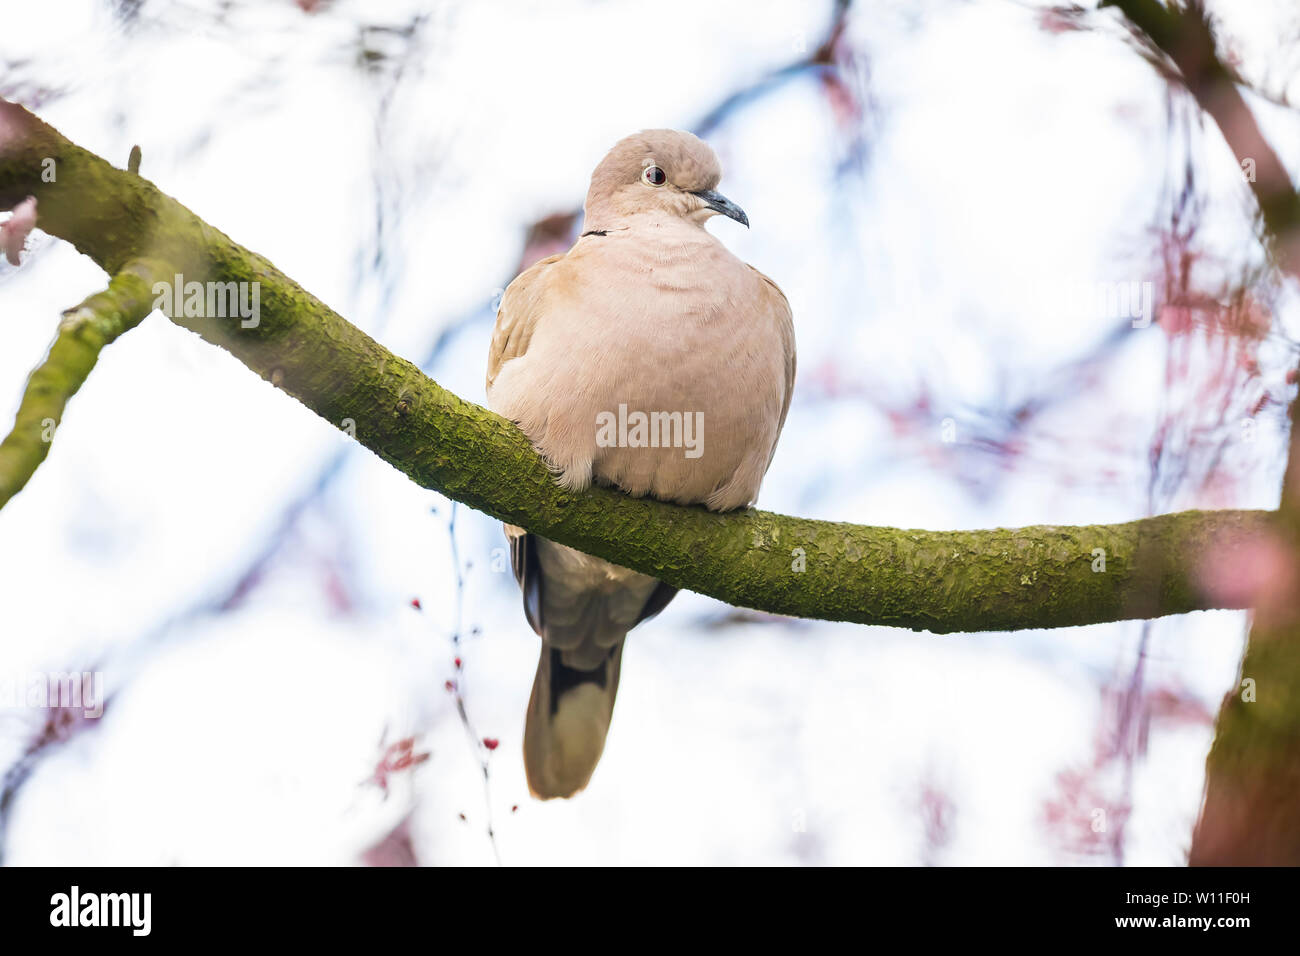 Closeup of a Eurasian collared dove (Streptopelia decaocto) bird, perched and nesting in a tree with pink blossom flowers Stock Photo